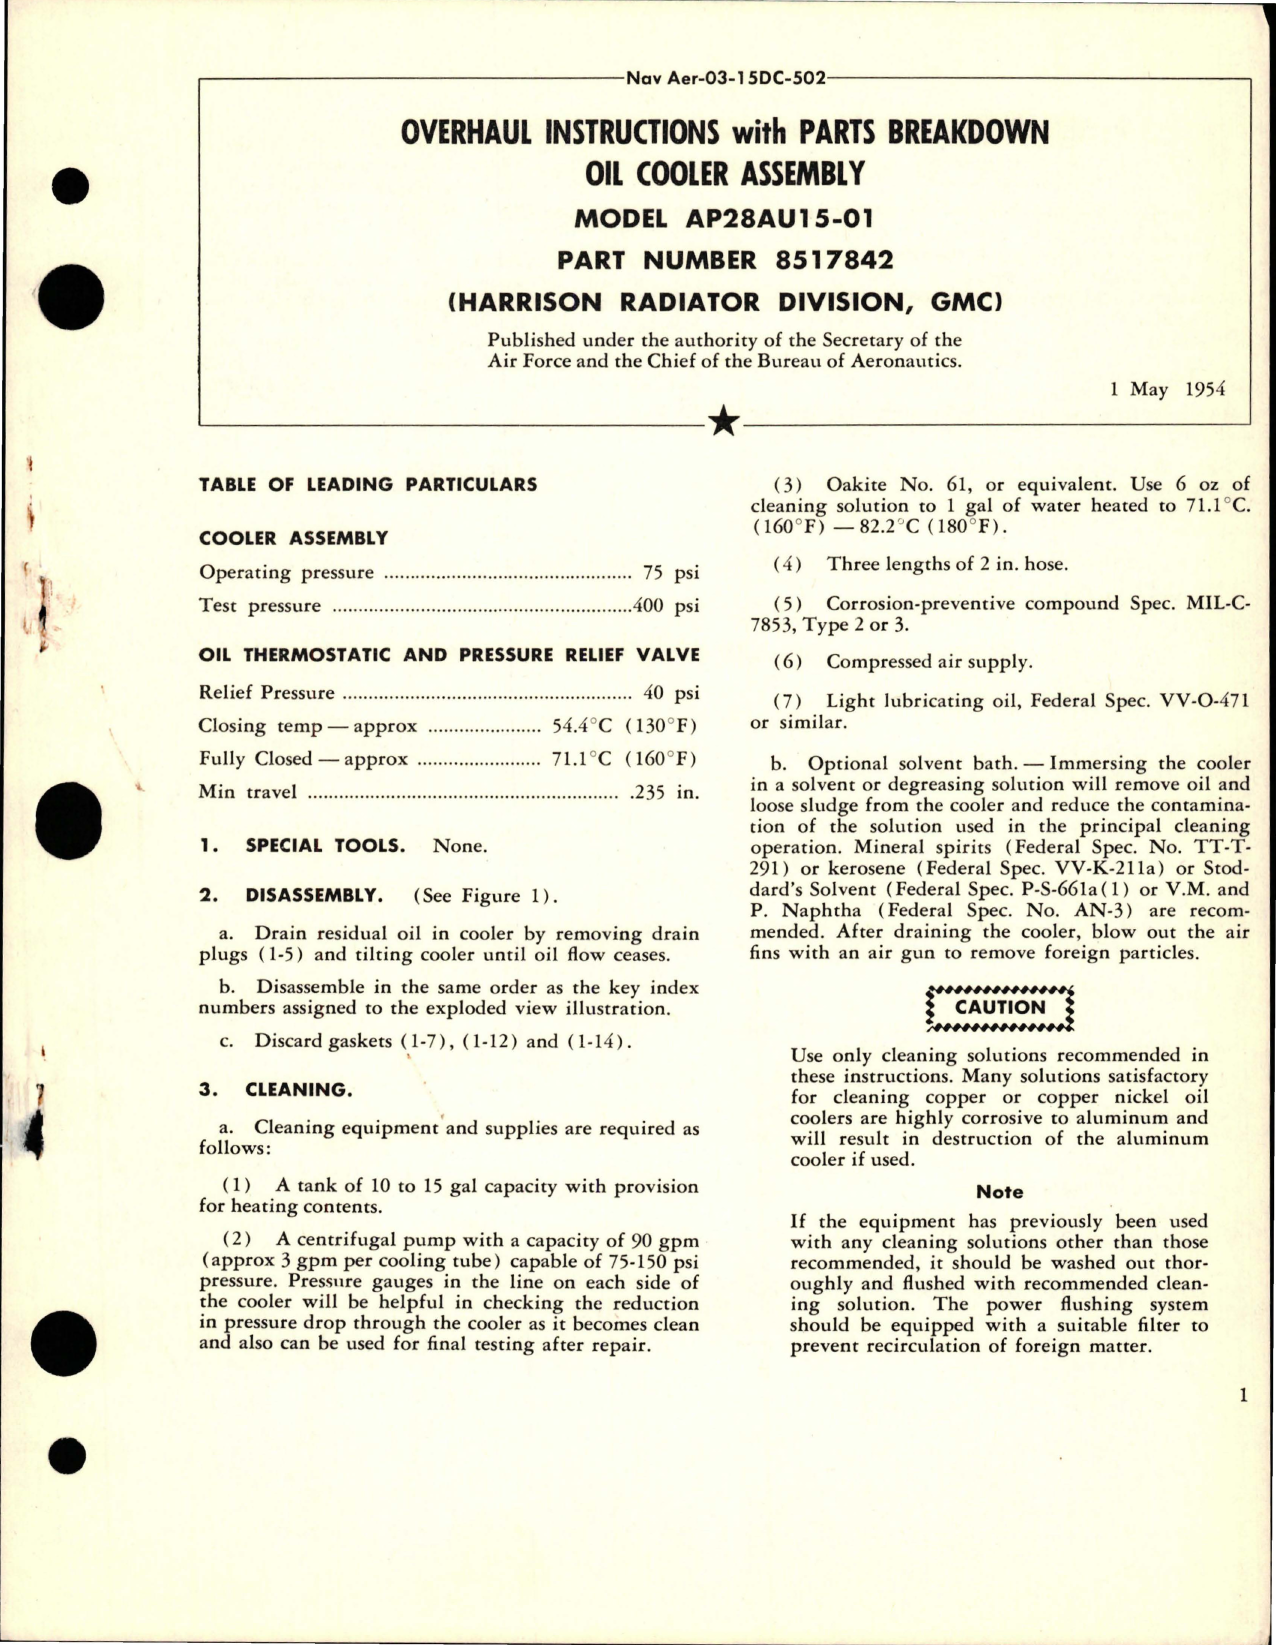 Sample page 1 from AirCorps Library document: Overhaul Instructions with Parts for Oil Cooler Assembly - Model AP28AU15-01 - Part 8517842